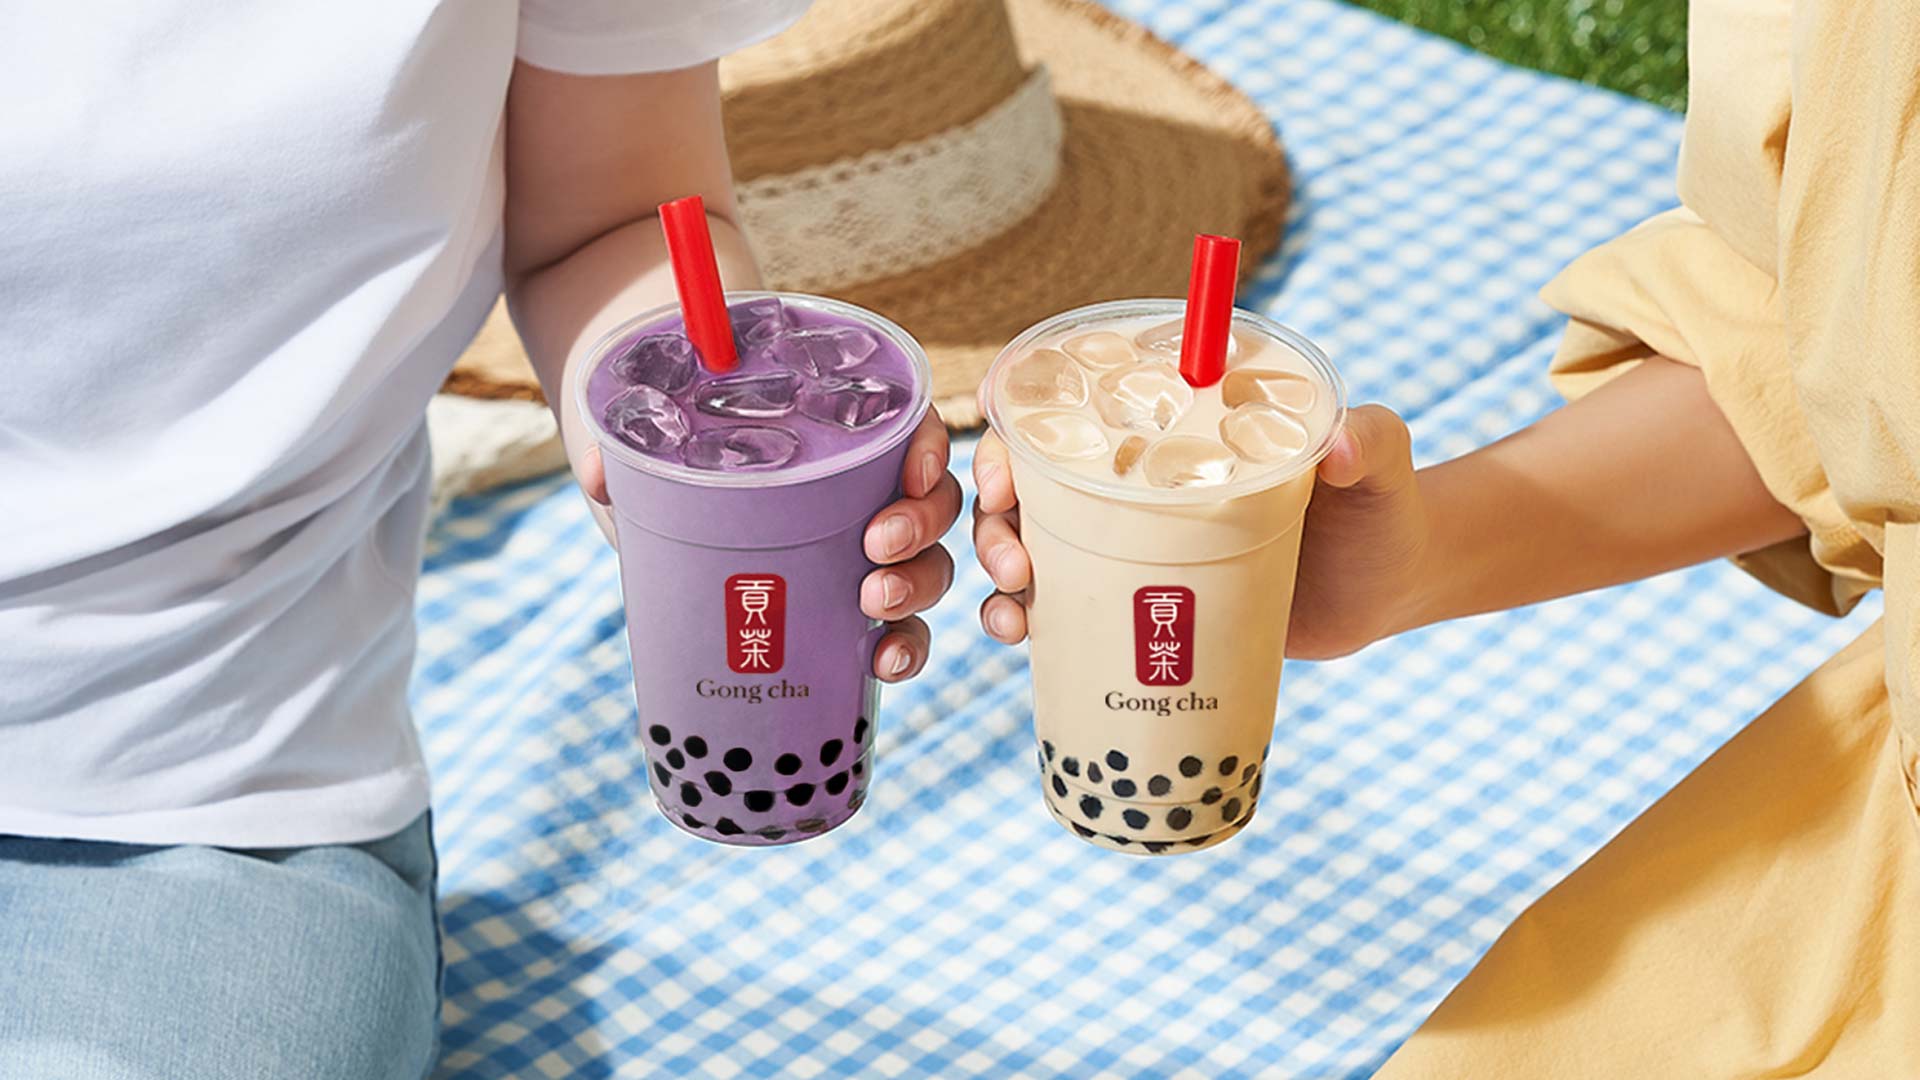 Couple holding Gong cha drinks at picnic